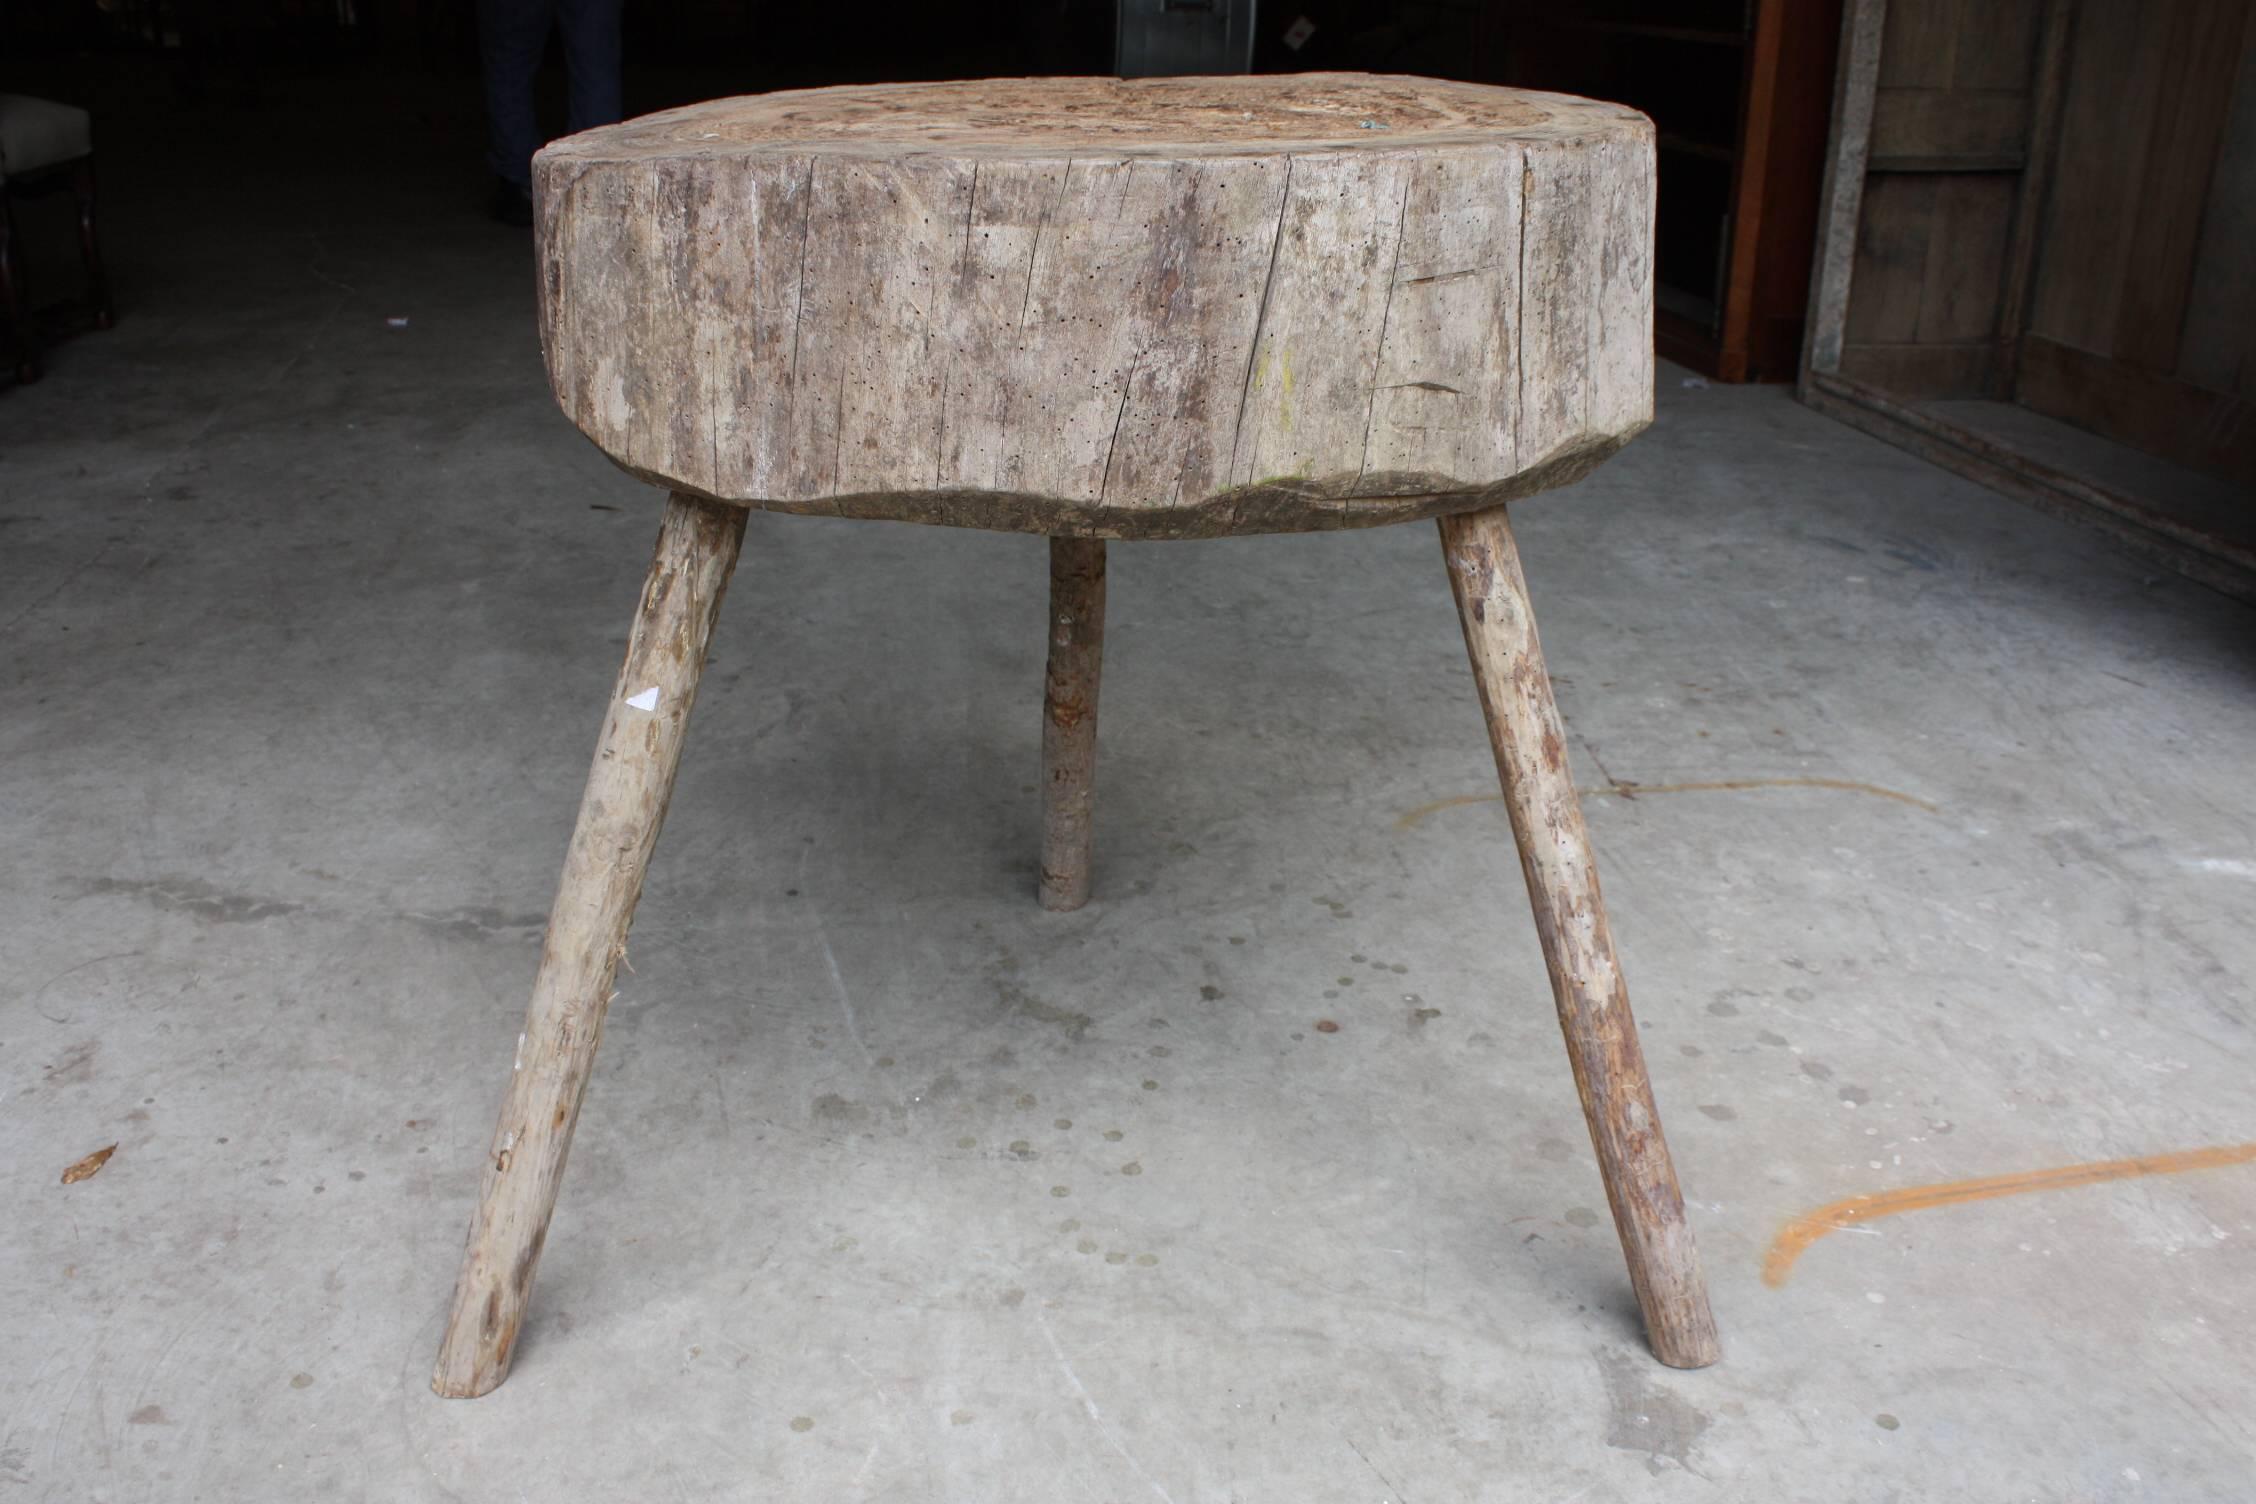 Primitive antique butcher block table with three branch form legs.